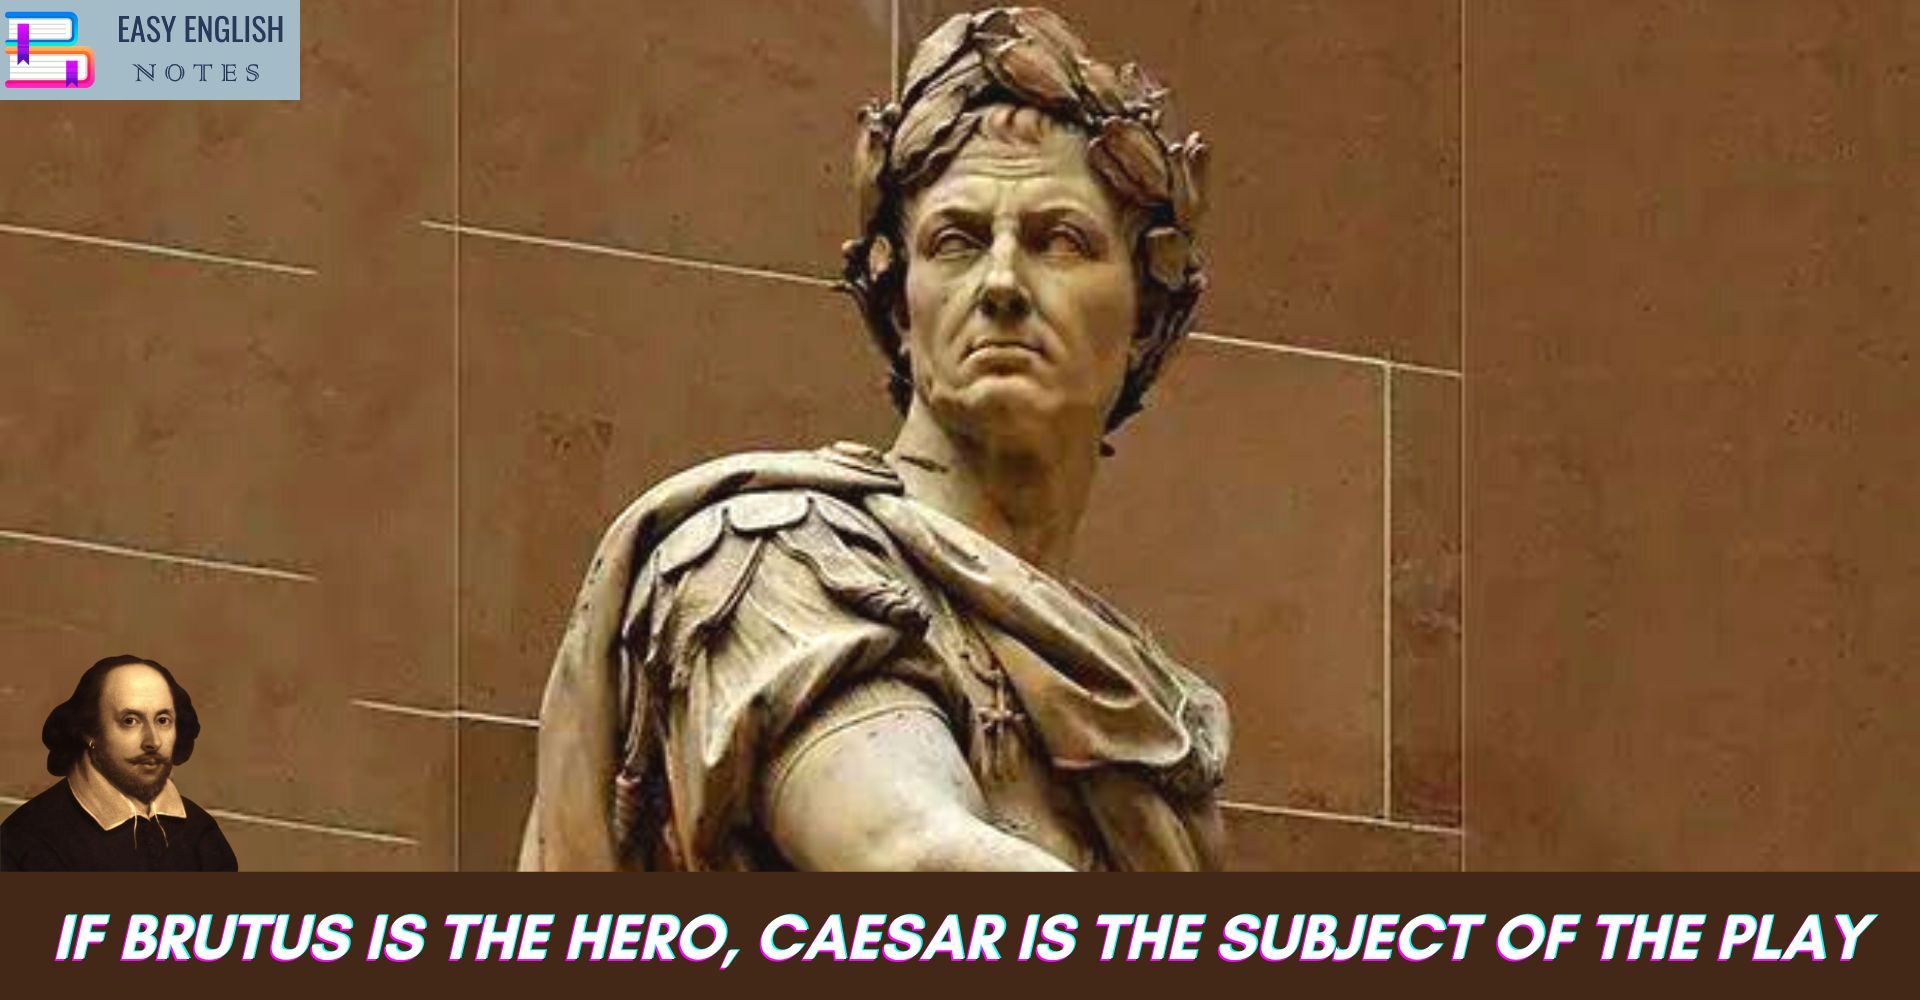 If Brutus is the hero, Caesar is the subject of the play